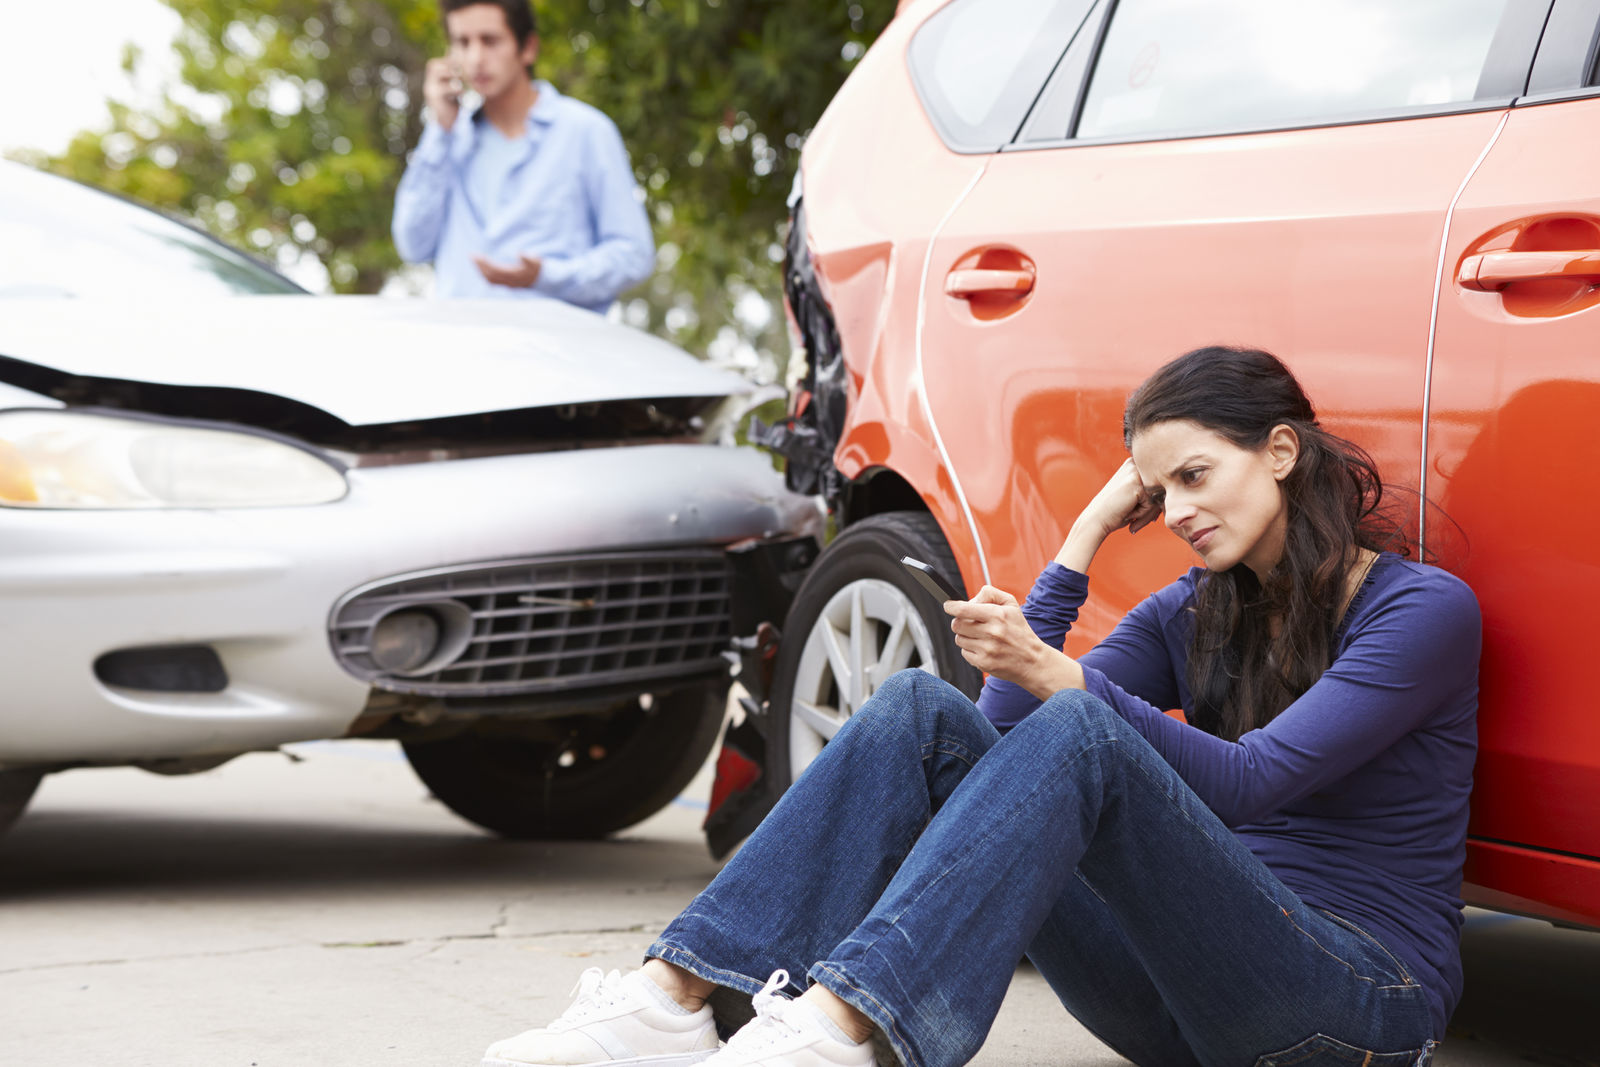 When to consider filing or not filing a car insurance claim?